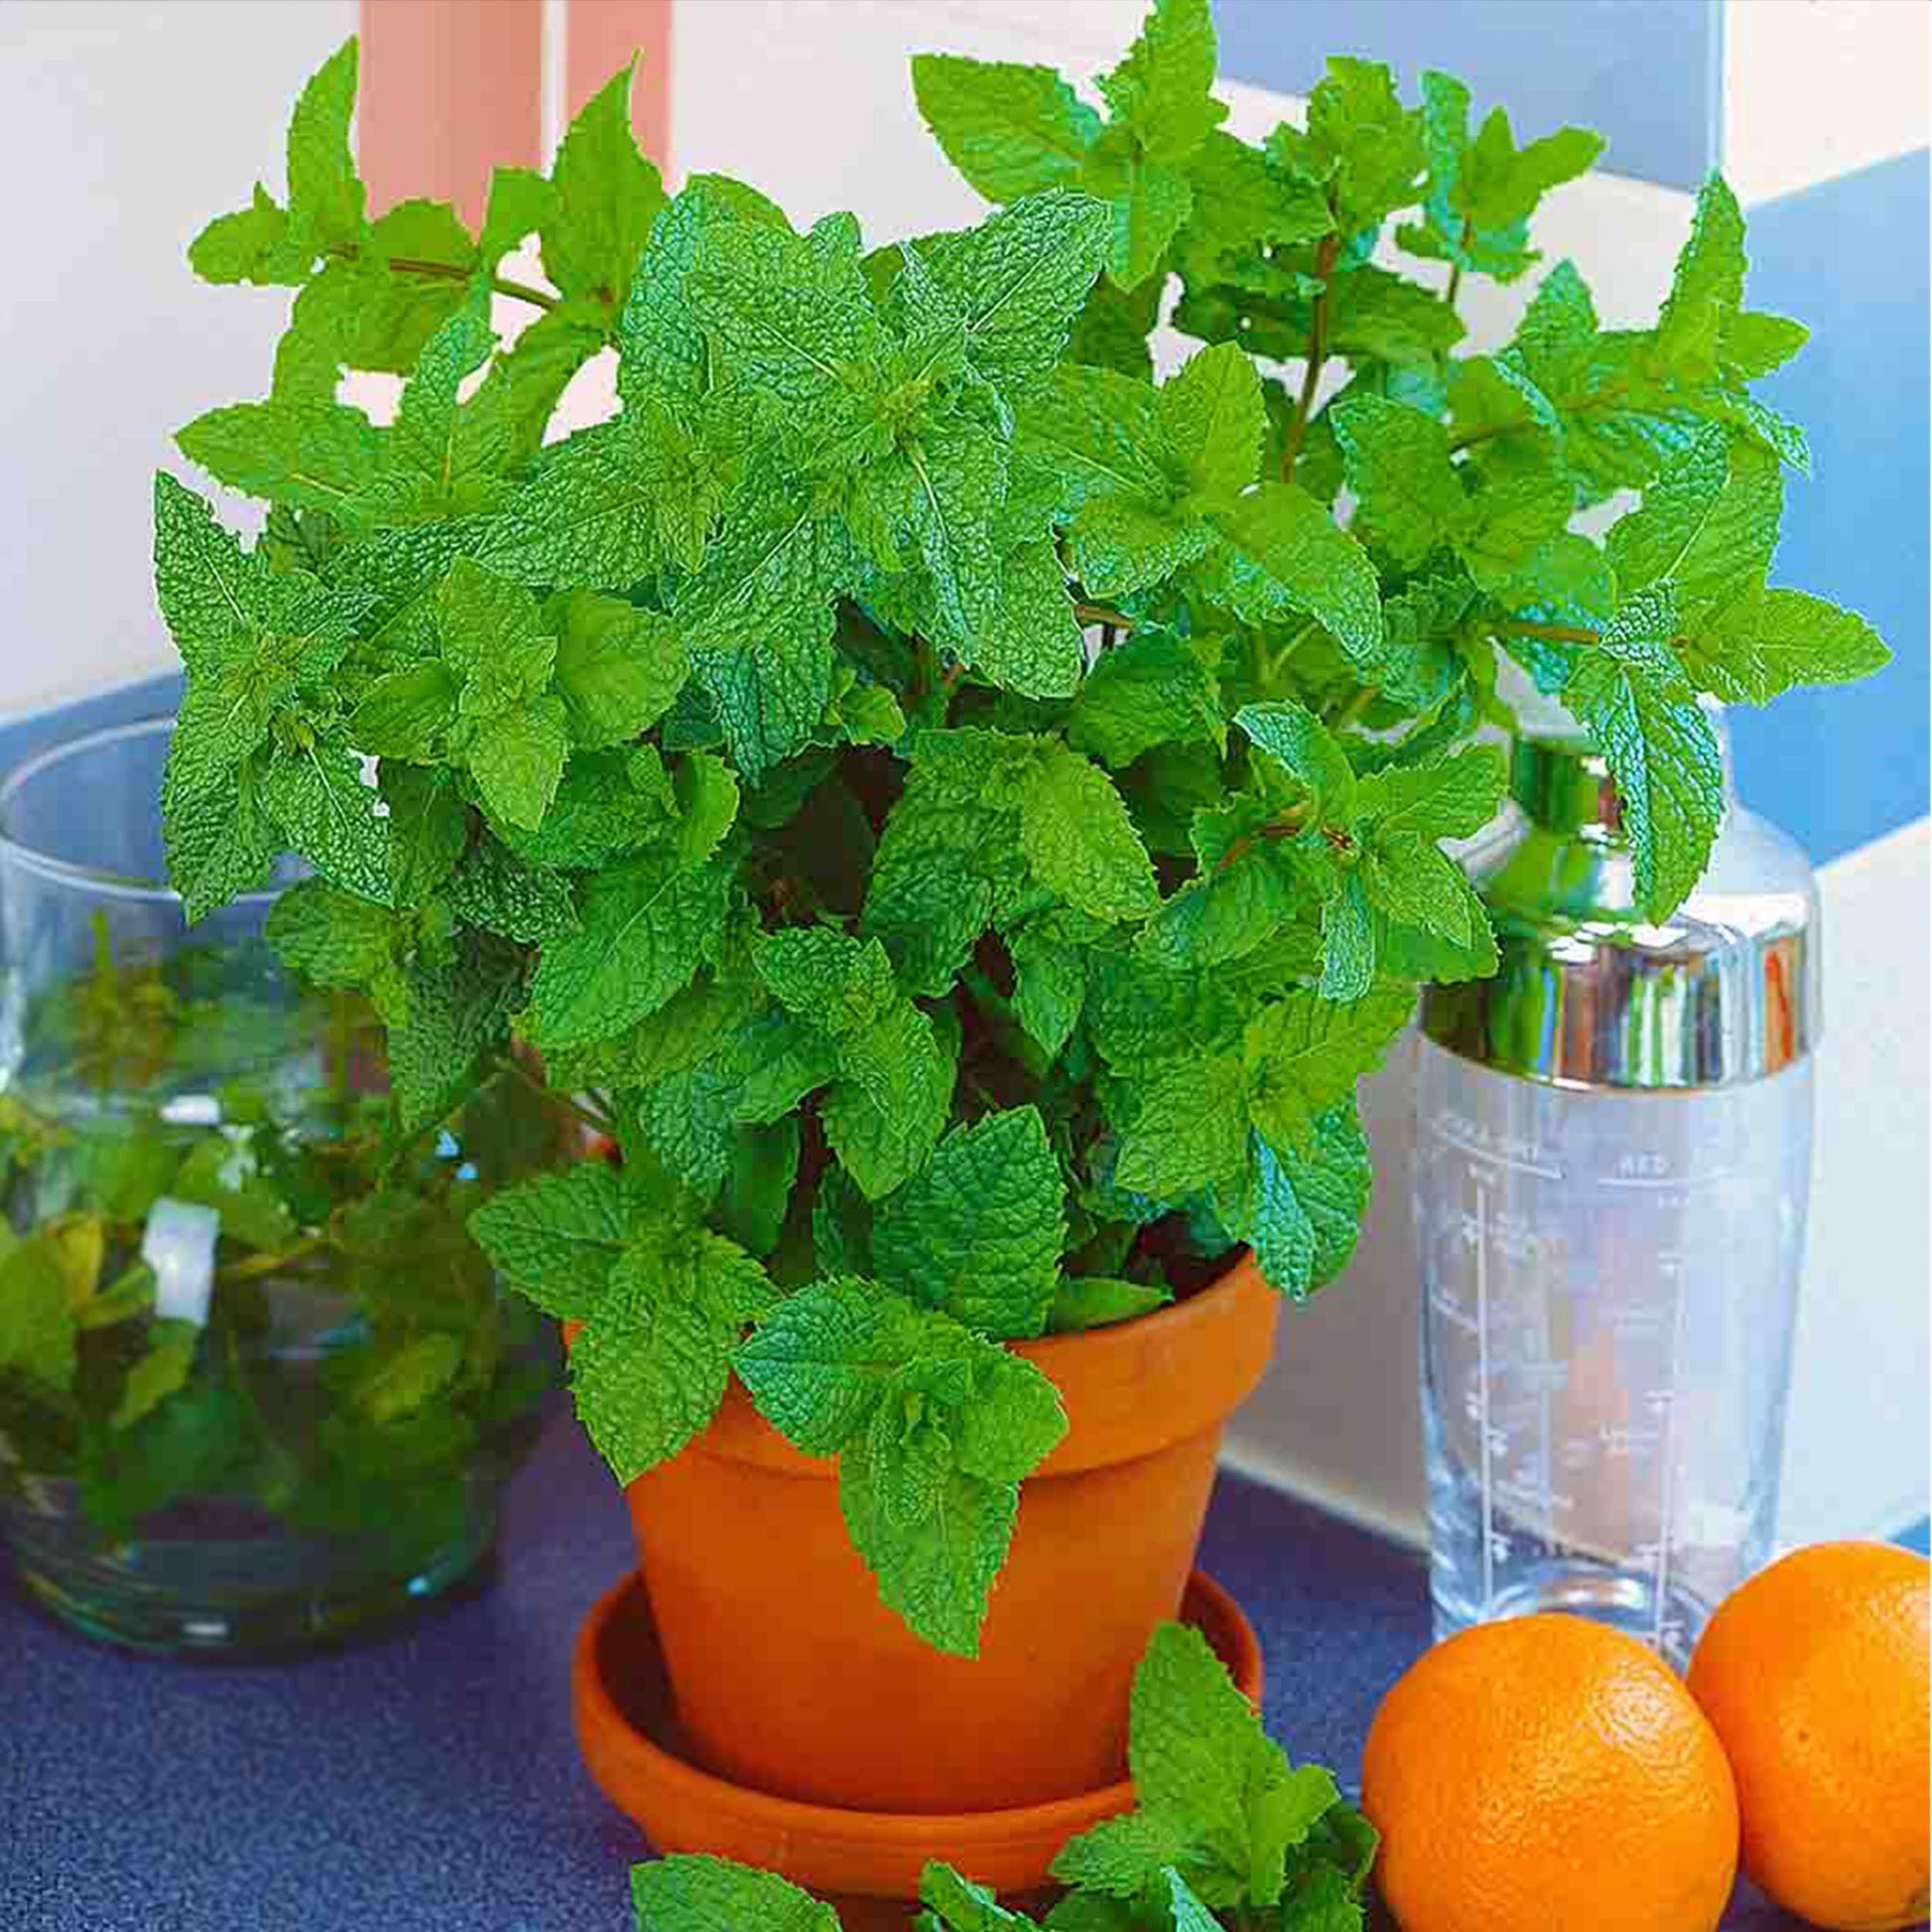 Fully mature peppermint herb plant grown from herb seeds in clay container.